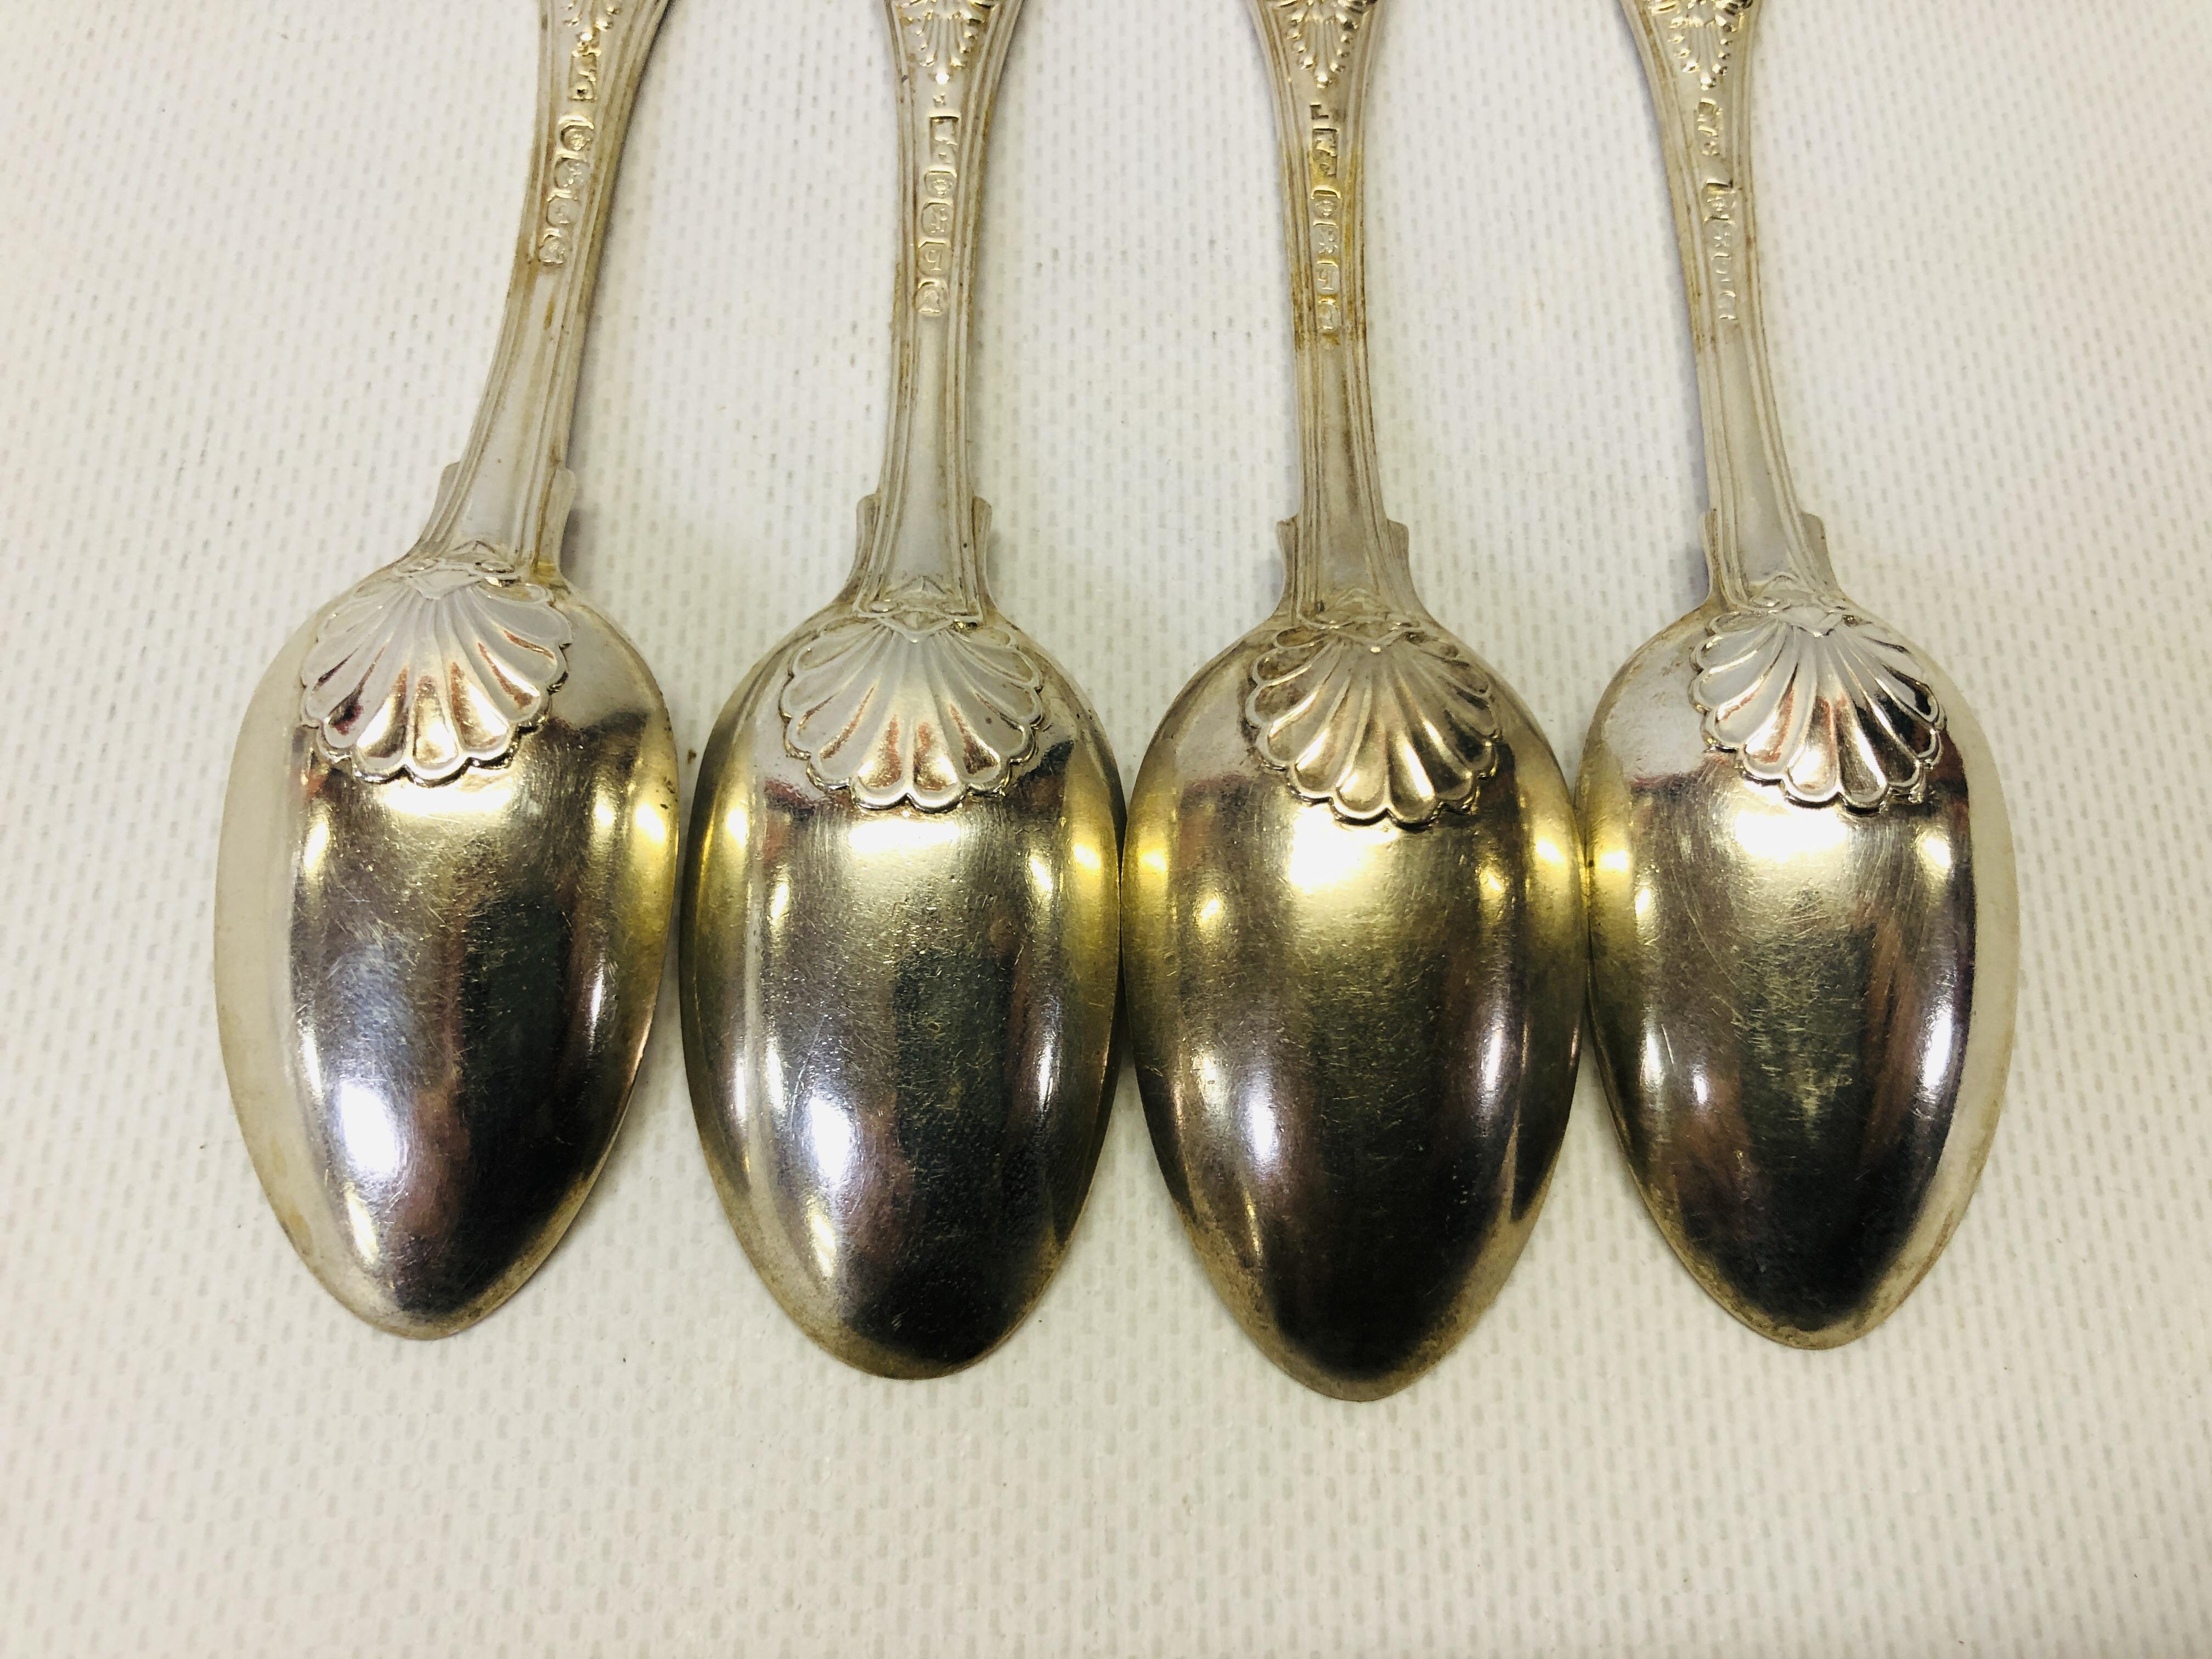 4 WILLIAM IV LARGE KING'S PATTERN SILVER TEASPOONS, W. - Image 7 of 12